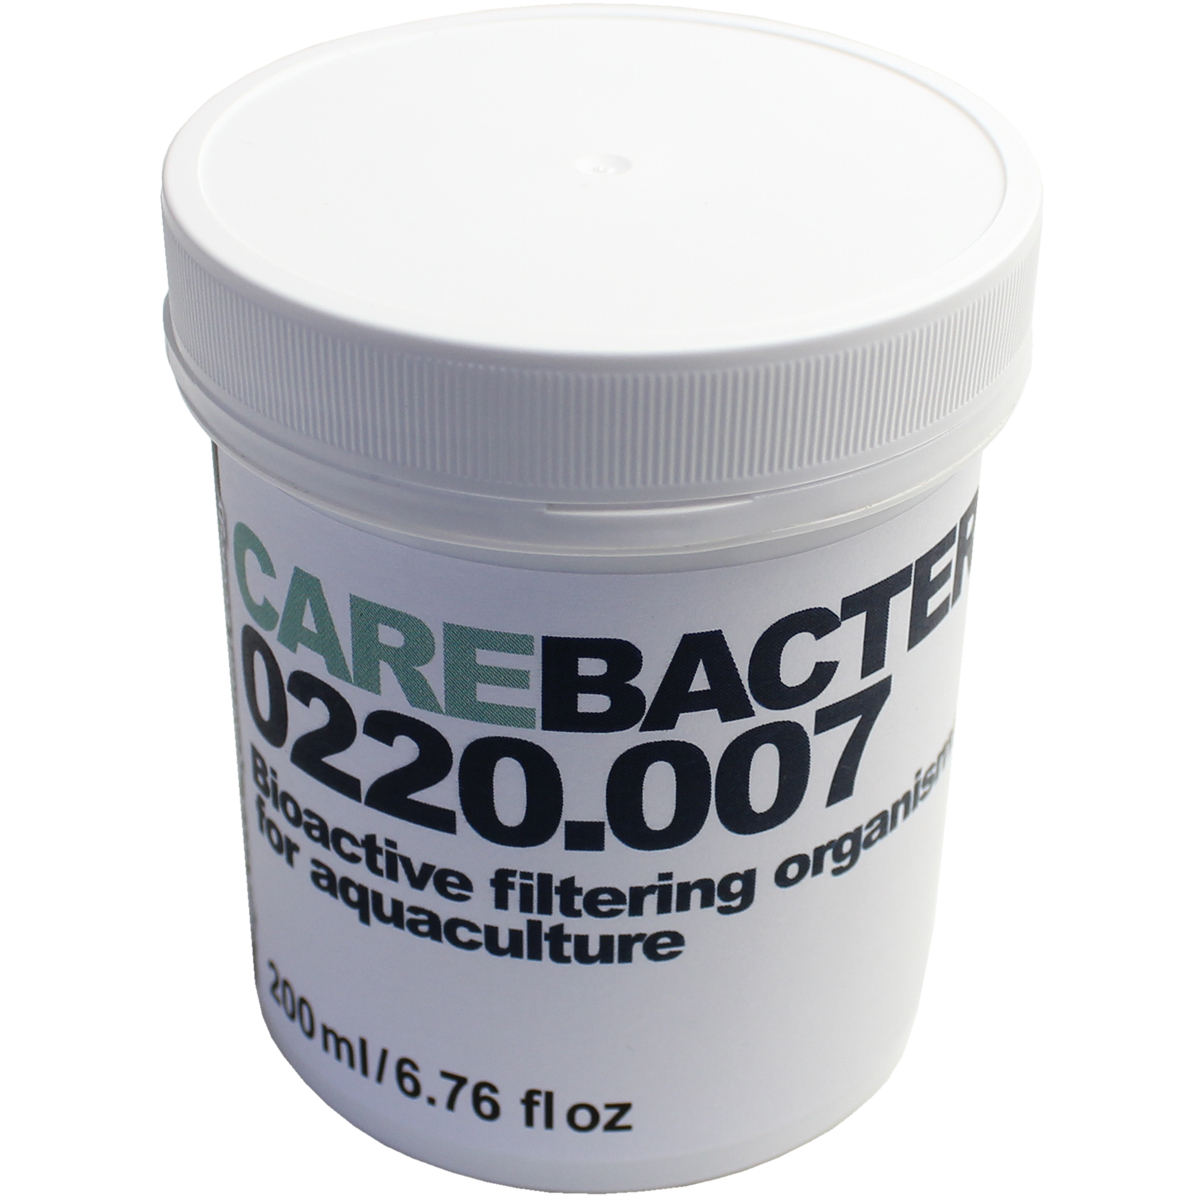 Tunze Care Bacter